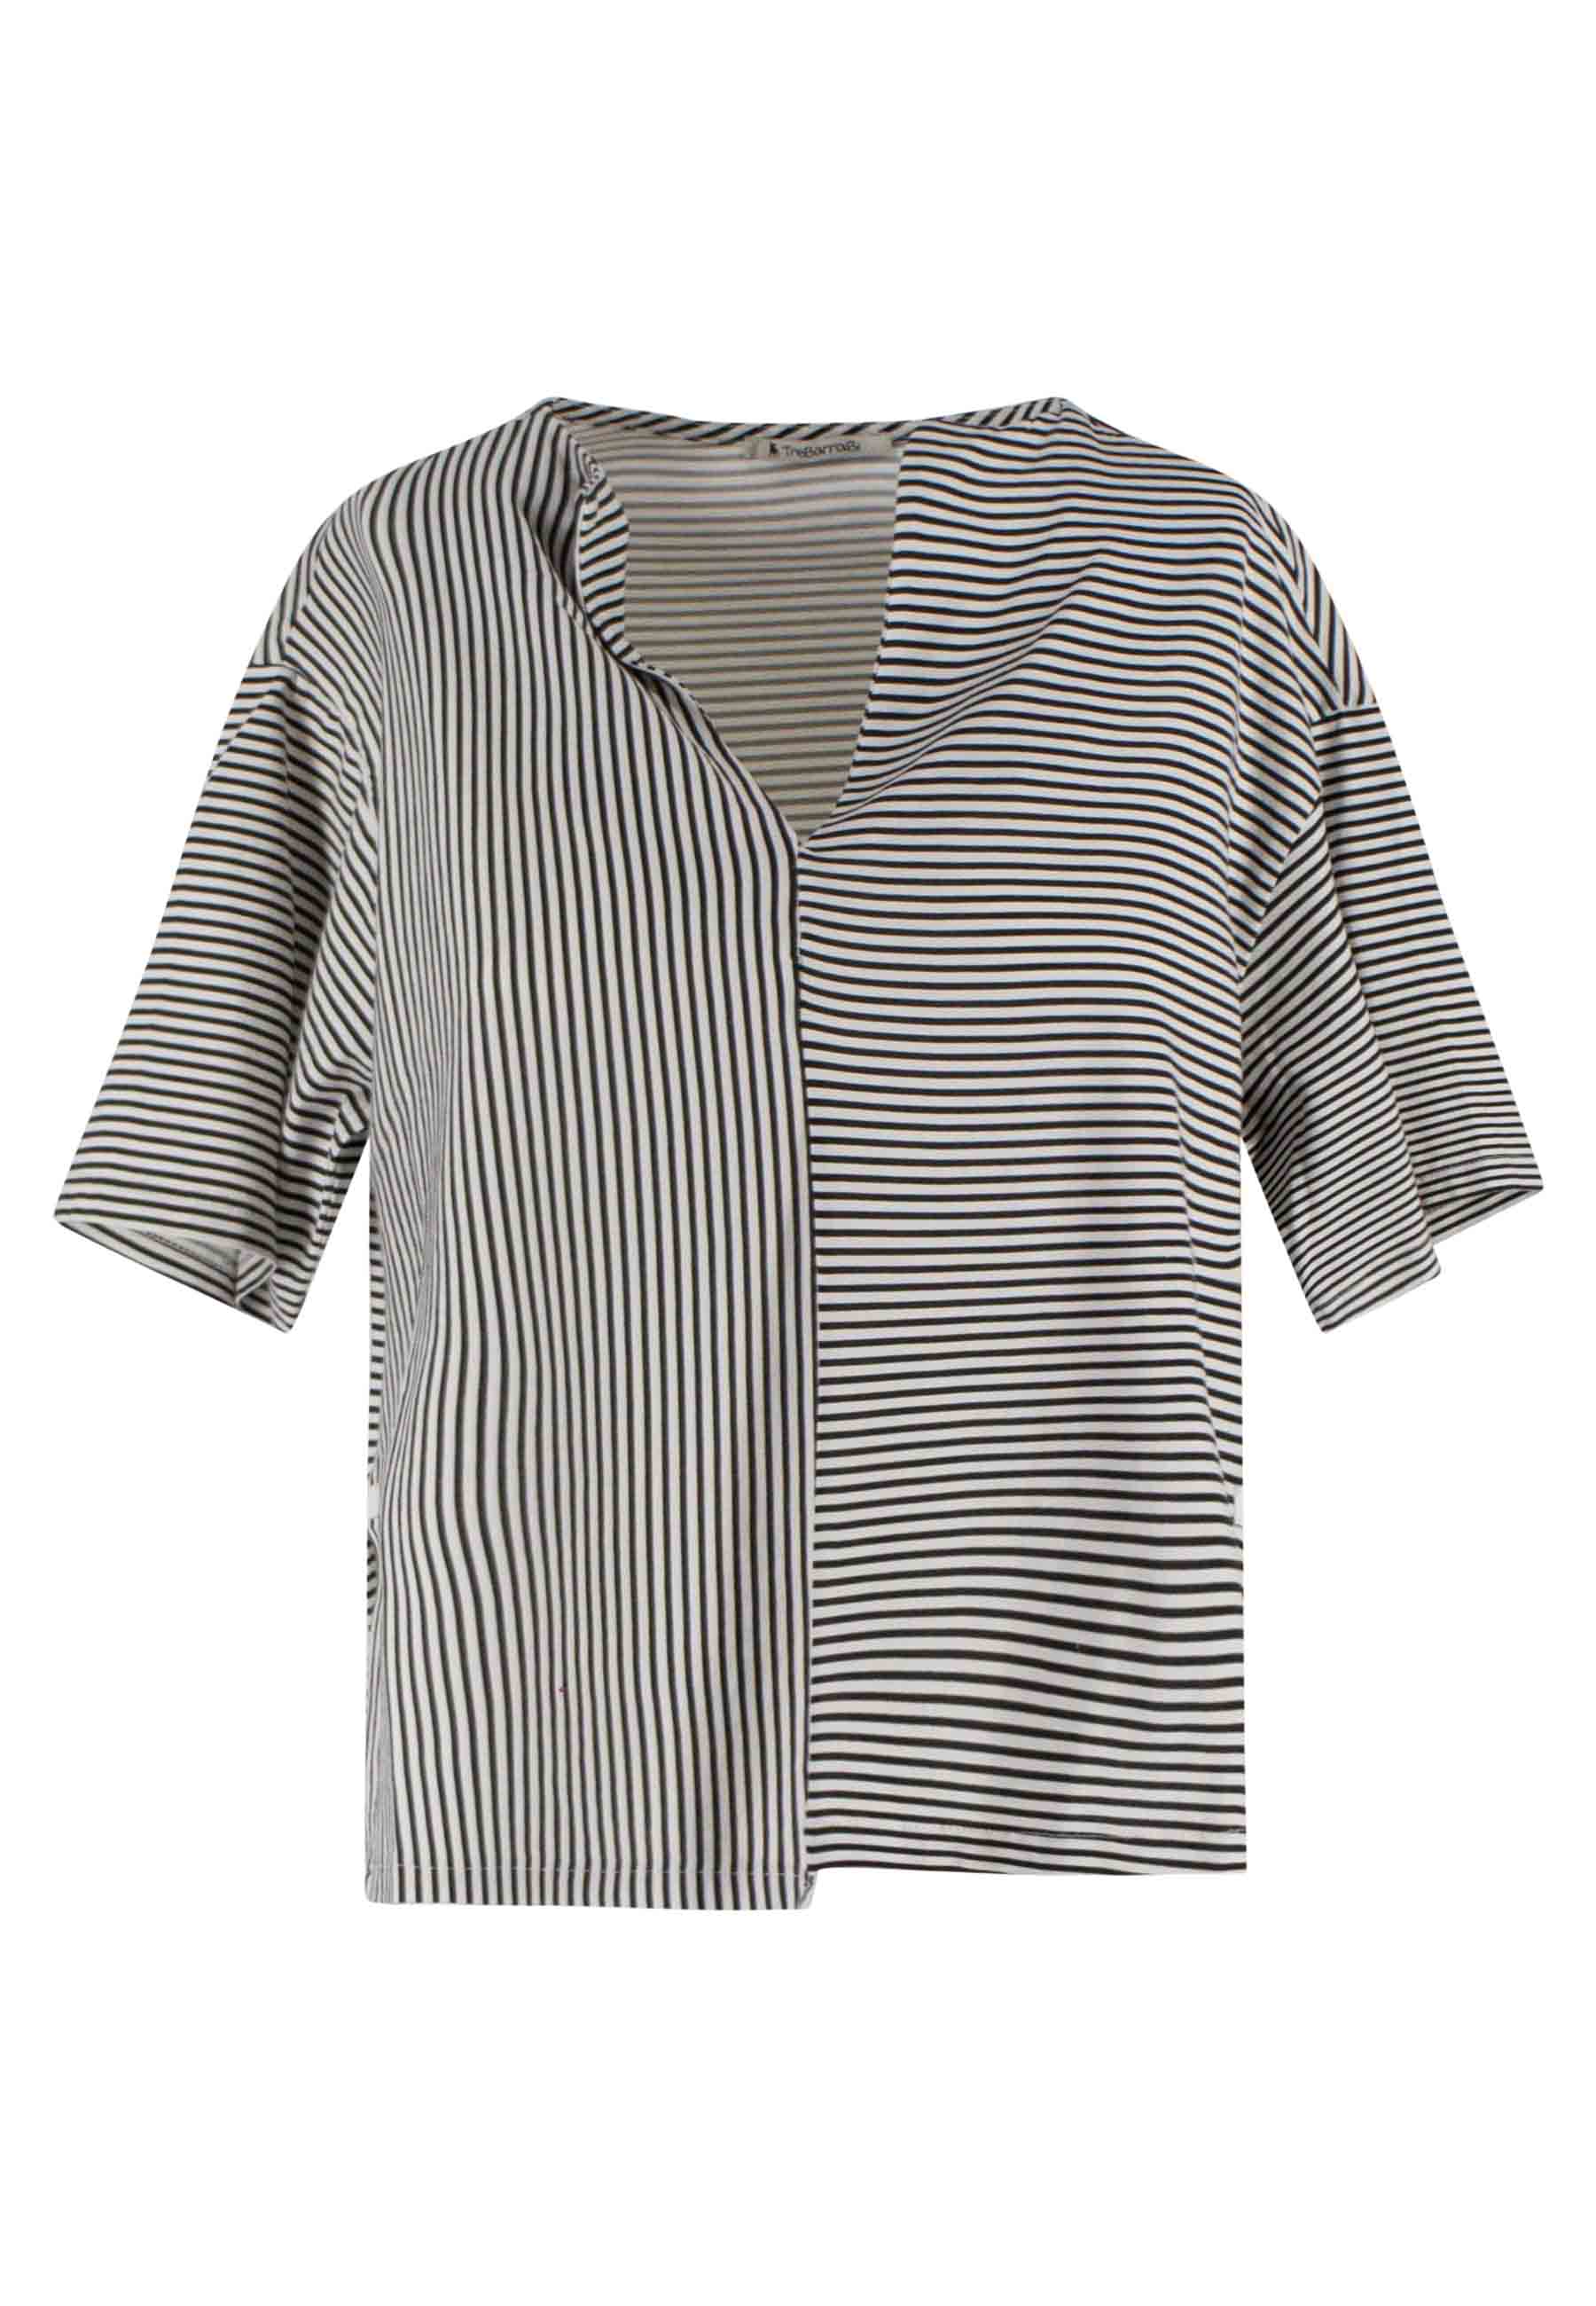 Tita women's T-shirt in black and white striped cotton and V-neck